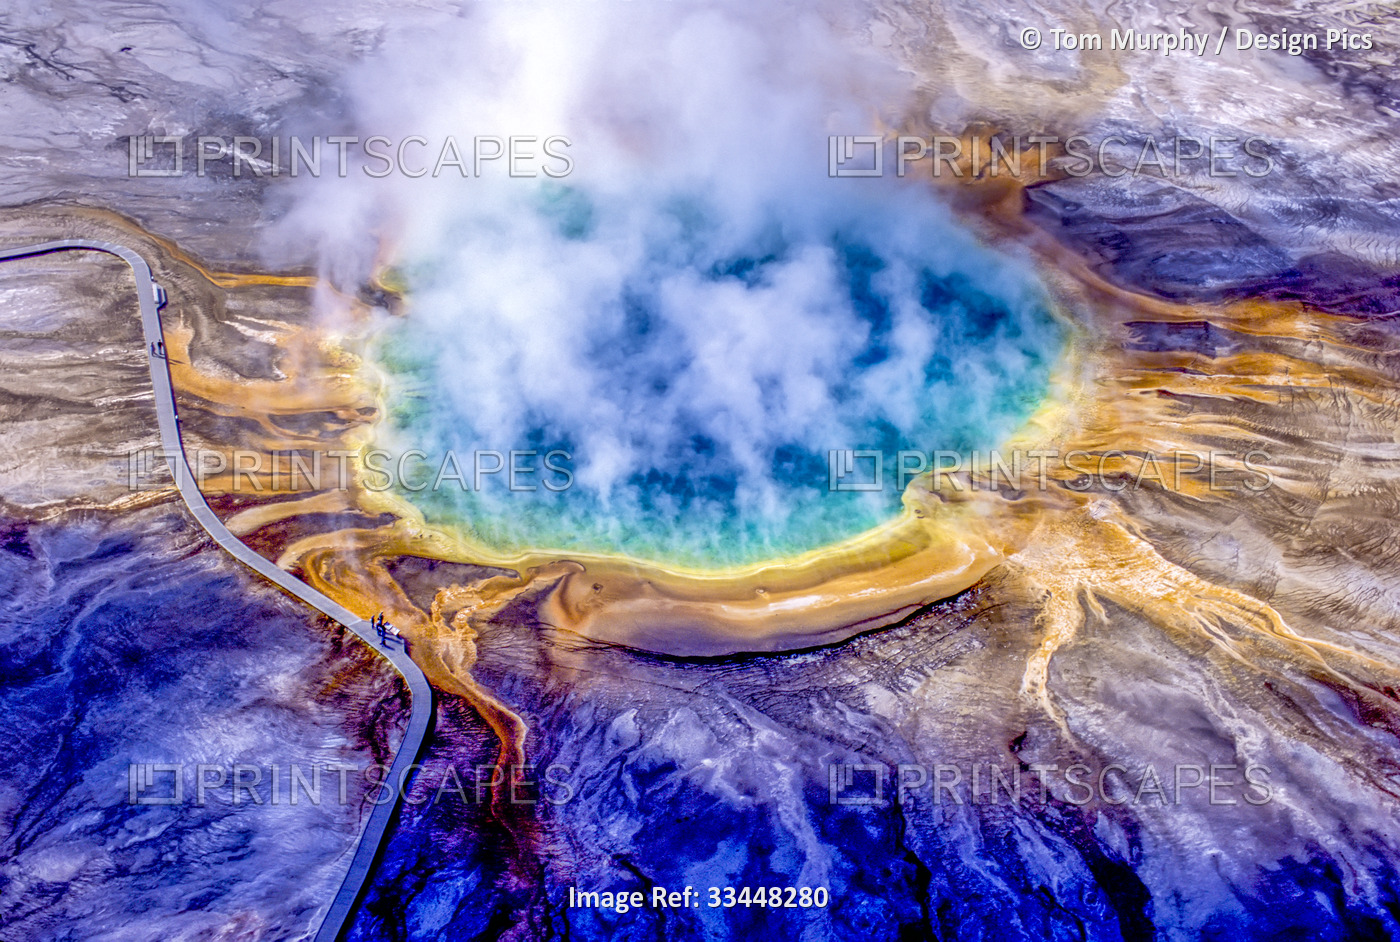 Grand Prismatic Spring is one of the largest and most beautiful examples of a ...